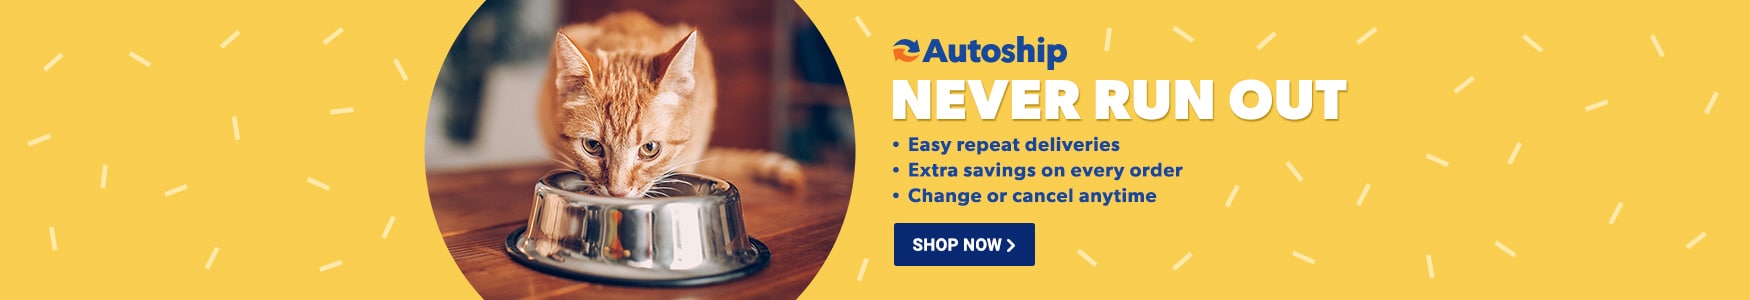 Autoship. Never run out. Easy repeat deliveries. Extra savings on every order. Change or cancel anytime.